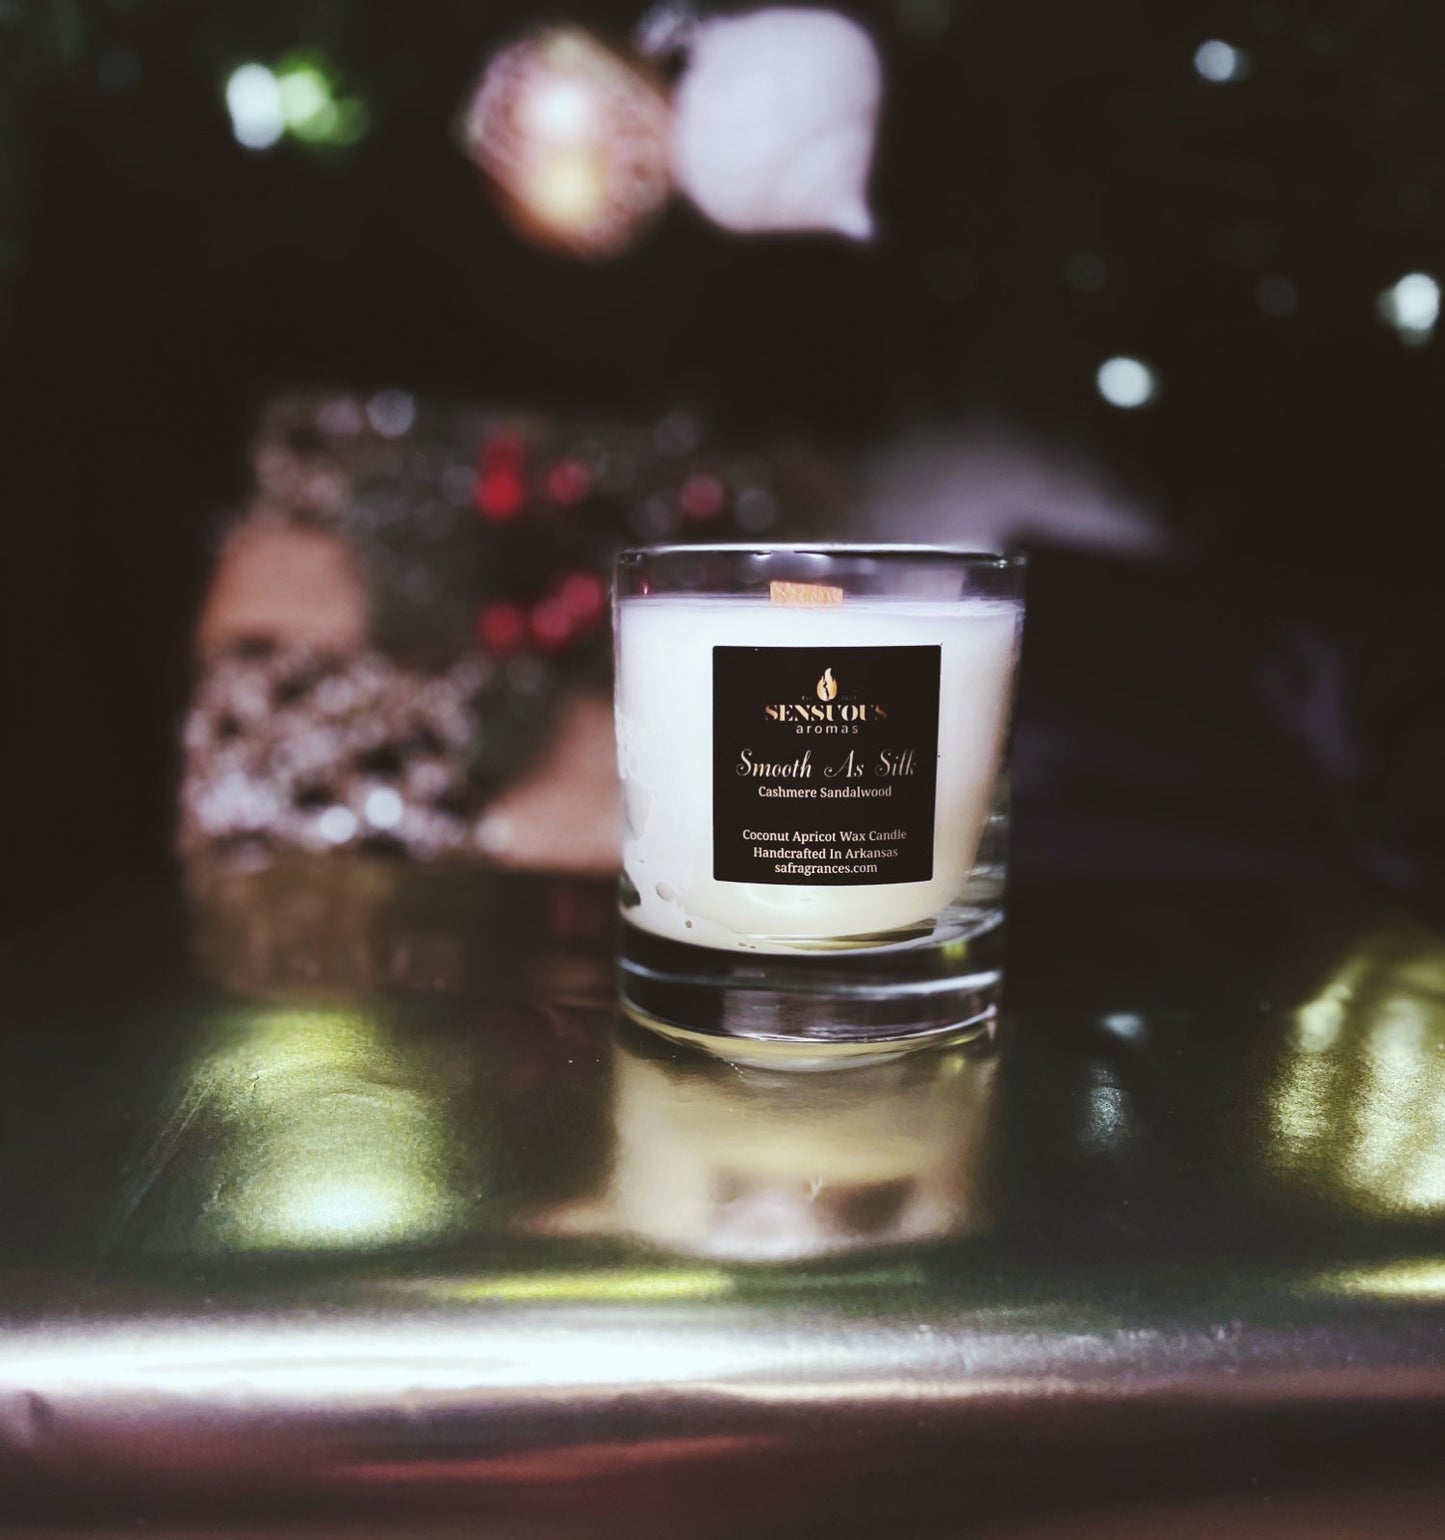 Cashmere scented candle to add warmth on long winter nights